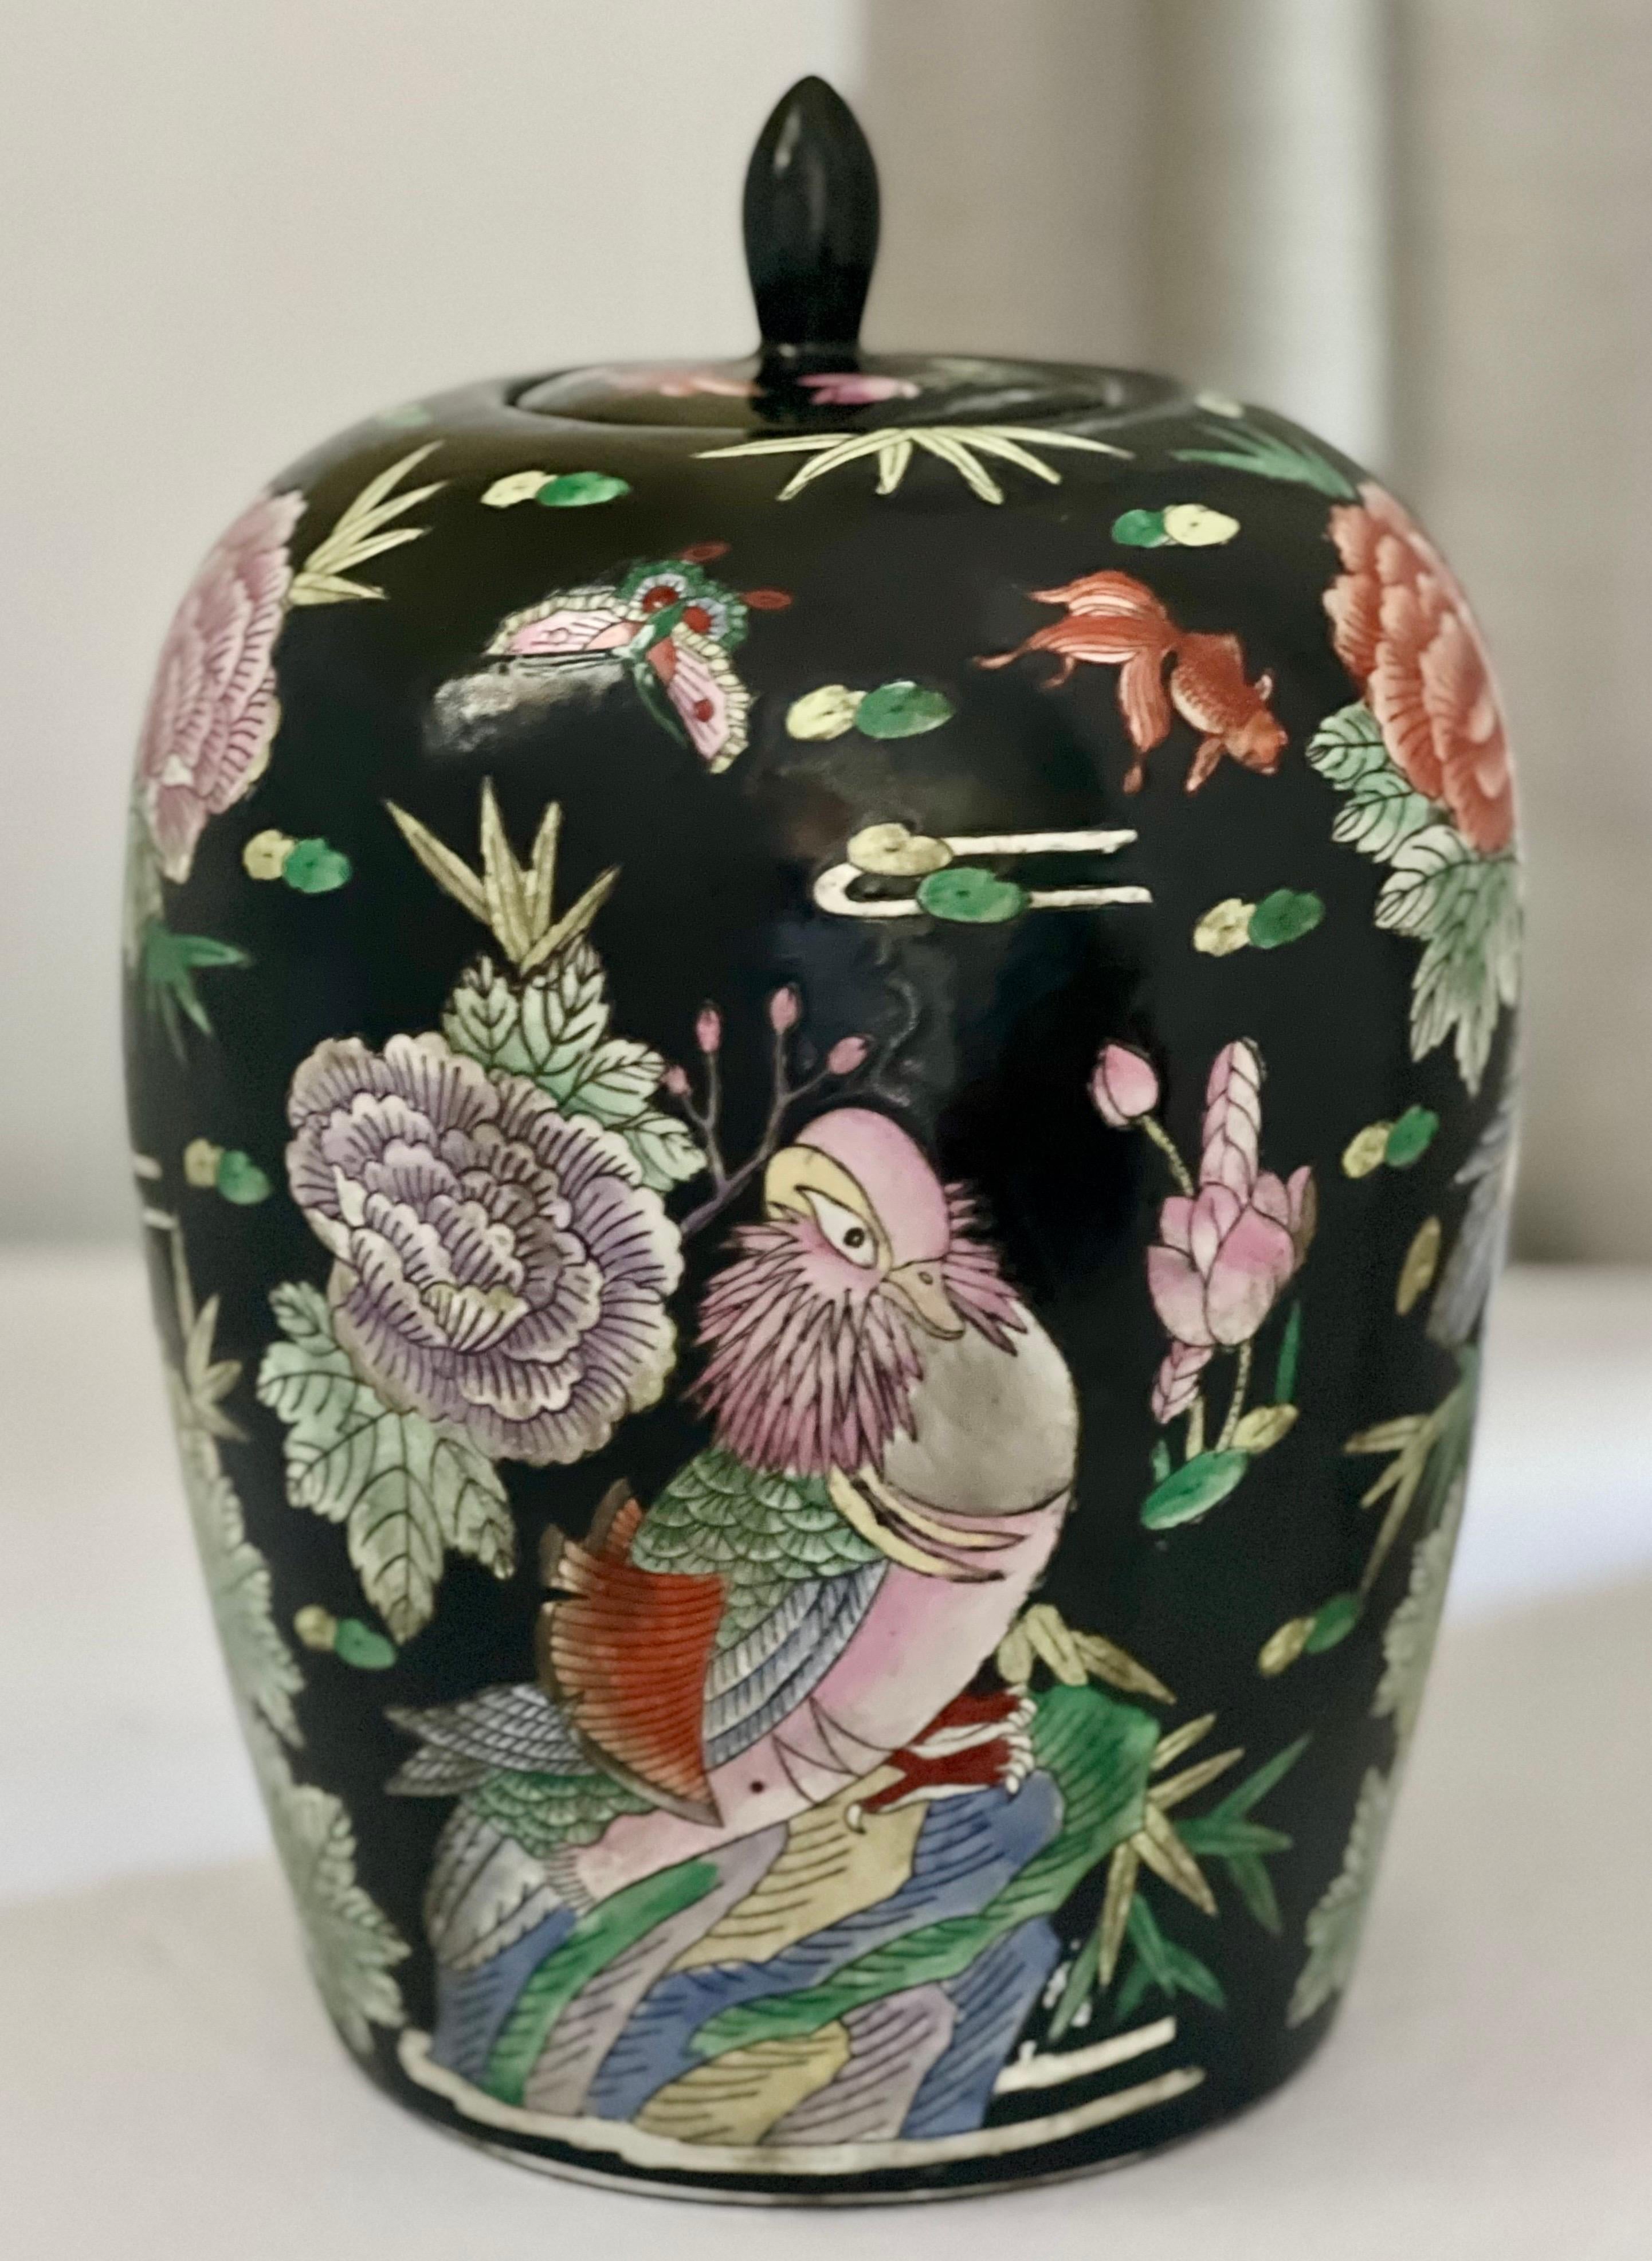 Early 20th century Chinese Famille Noire porcelain ovoid ginger jar with lid.

Wonderful ovoid shape jar with nature themed design hand painted with large birds, flowers, koi fish, lily pads, dragonflies and butterflies. Soft shades of peach, pink,